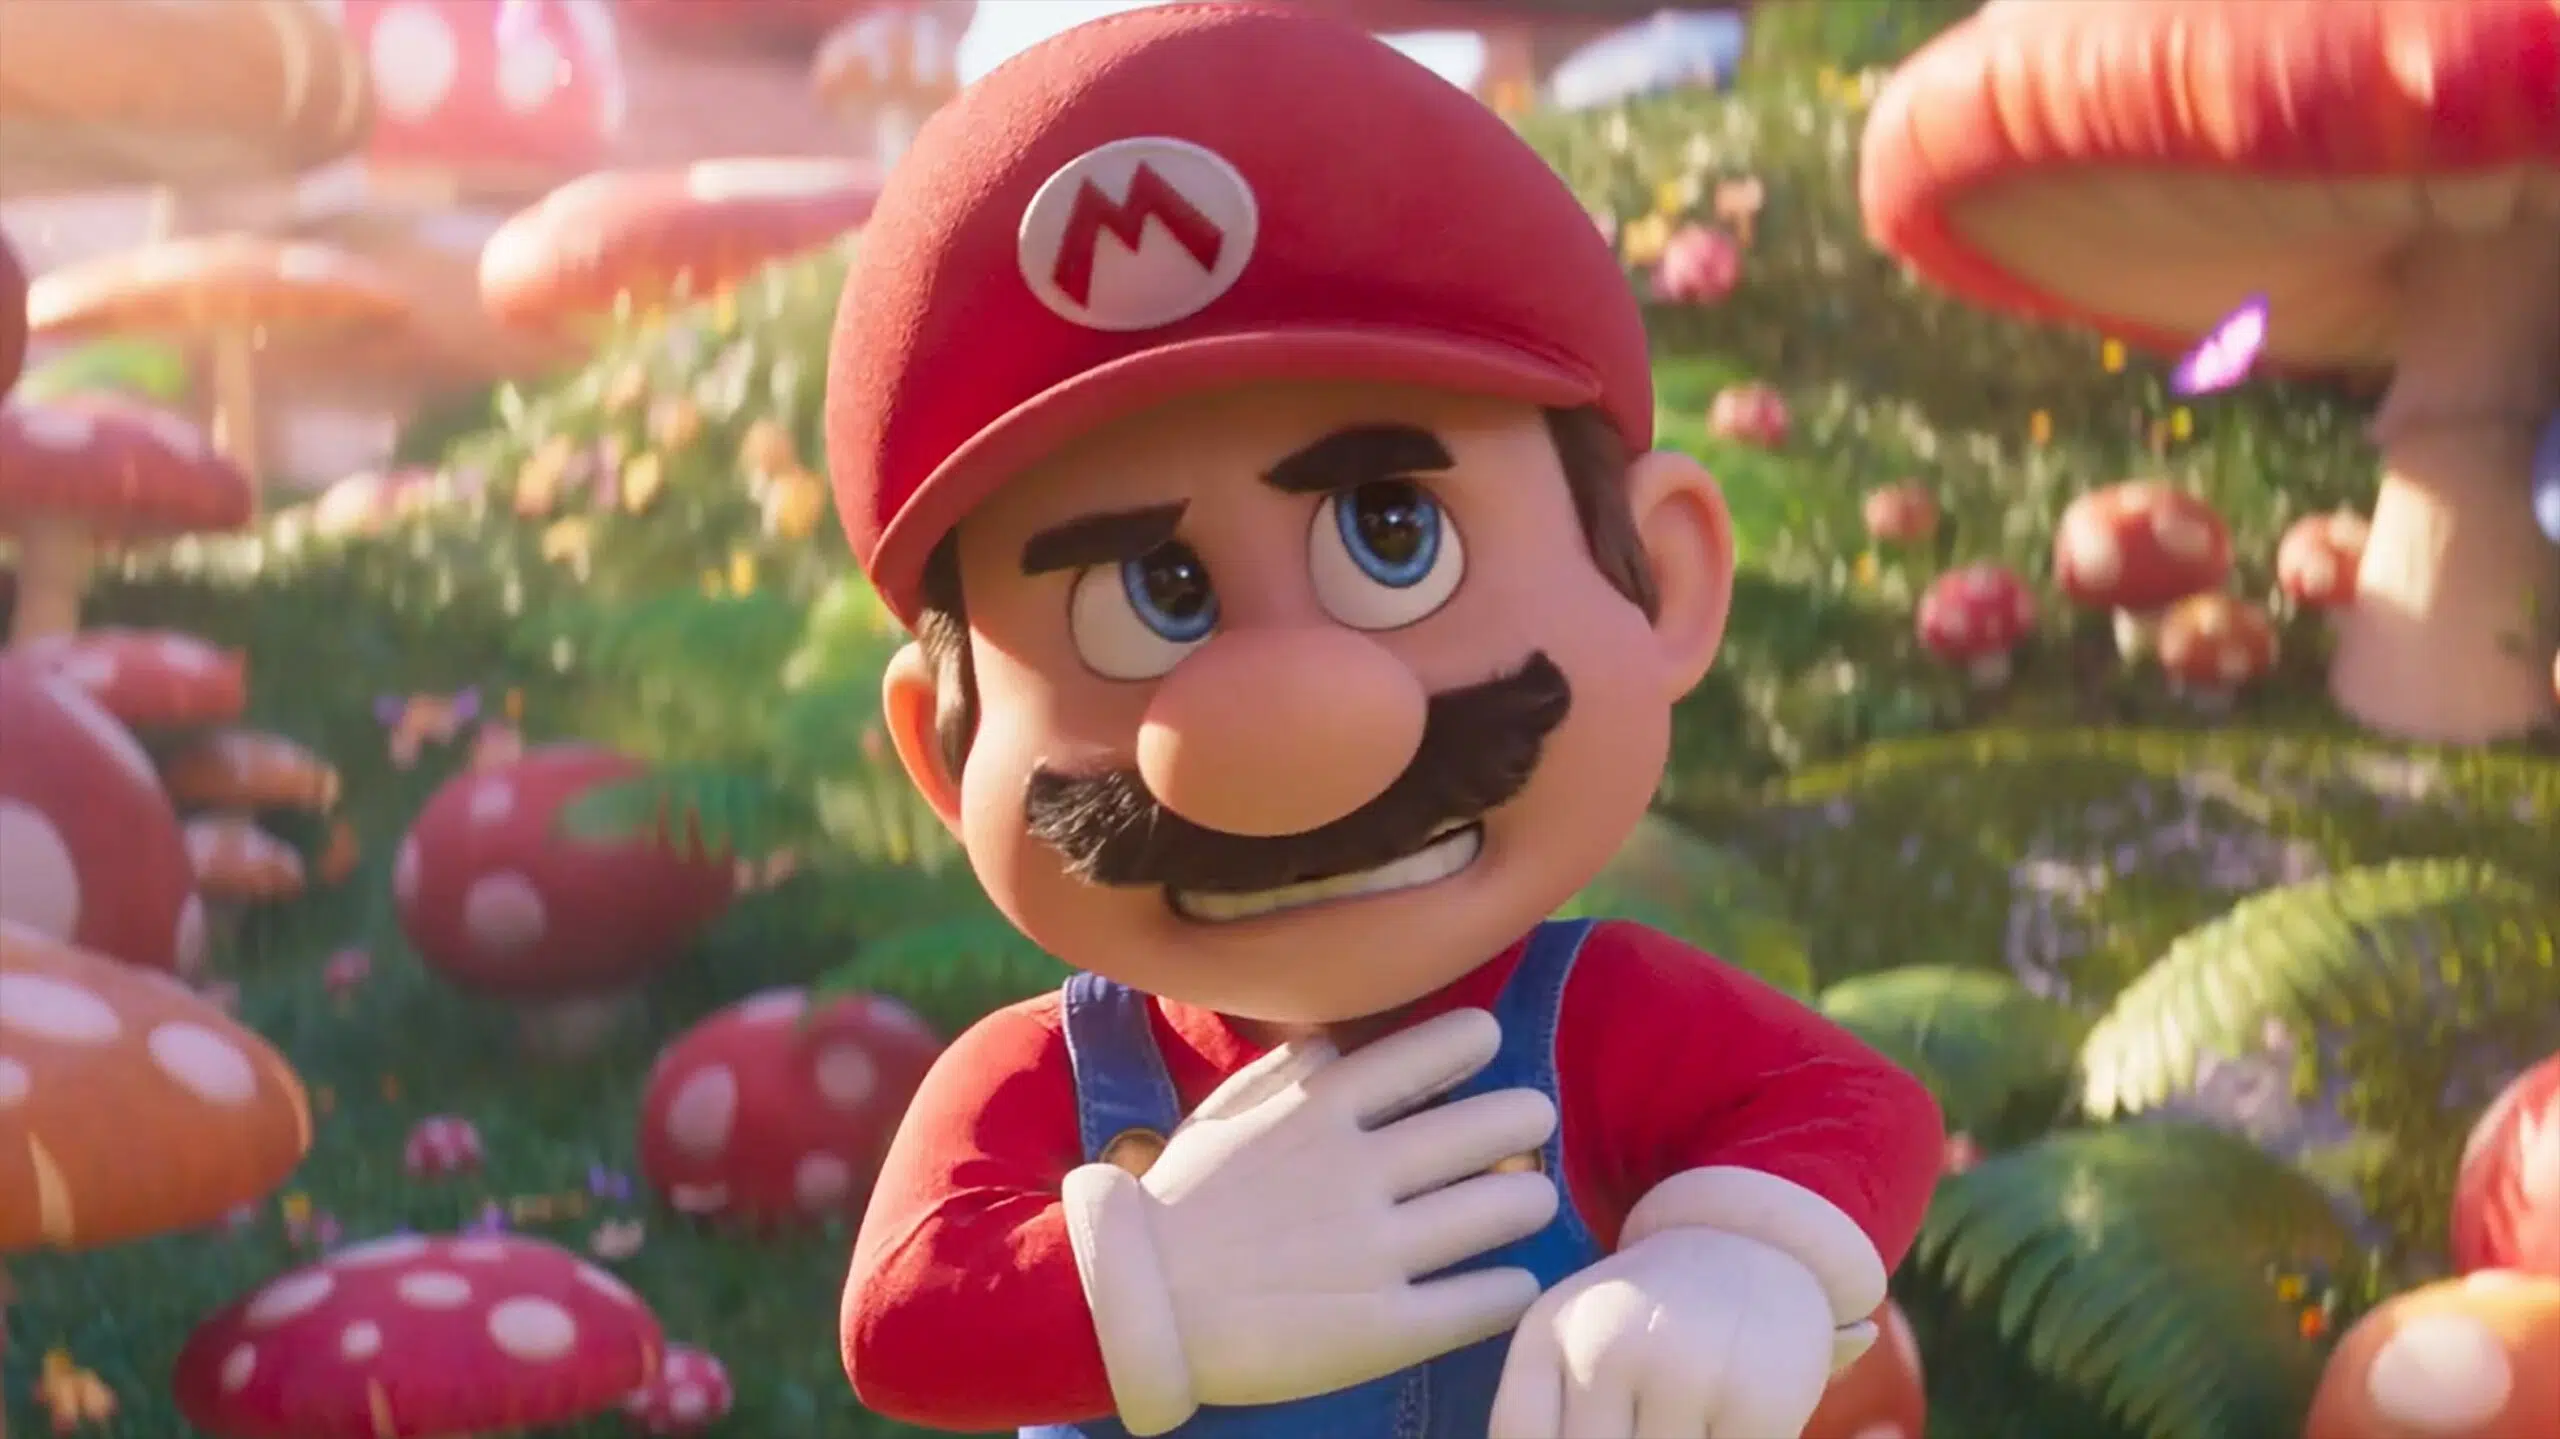 (Watch) Trailer for "The Super Mario Bros." Movie Released